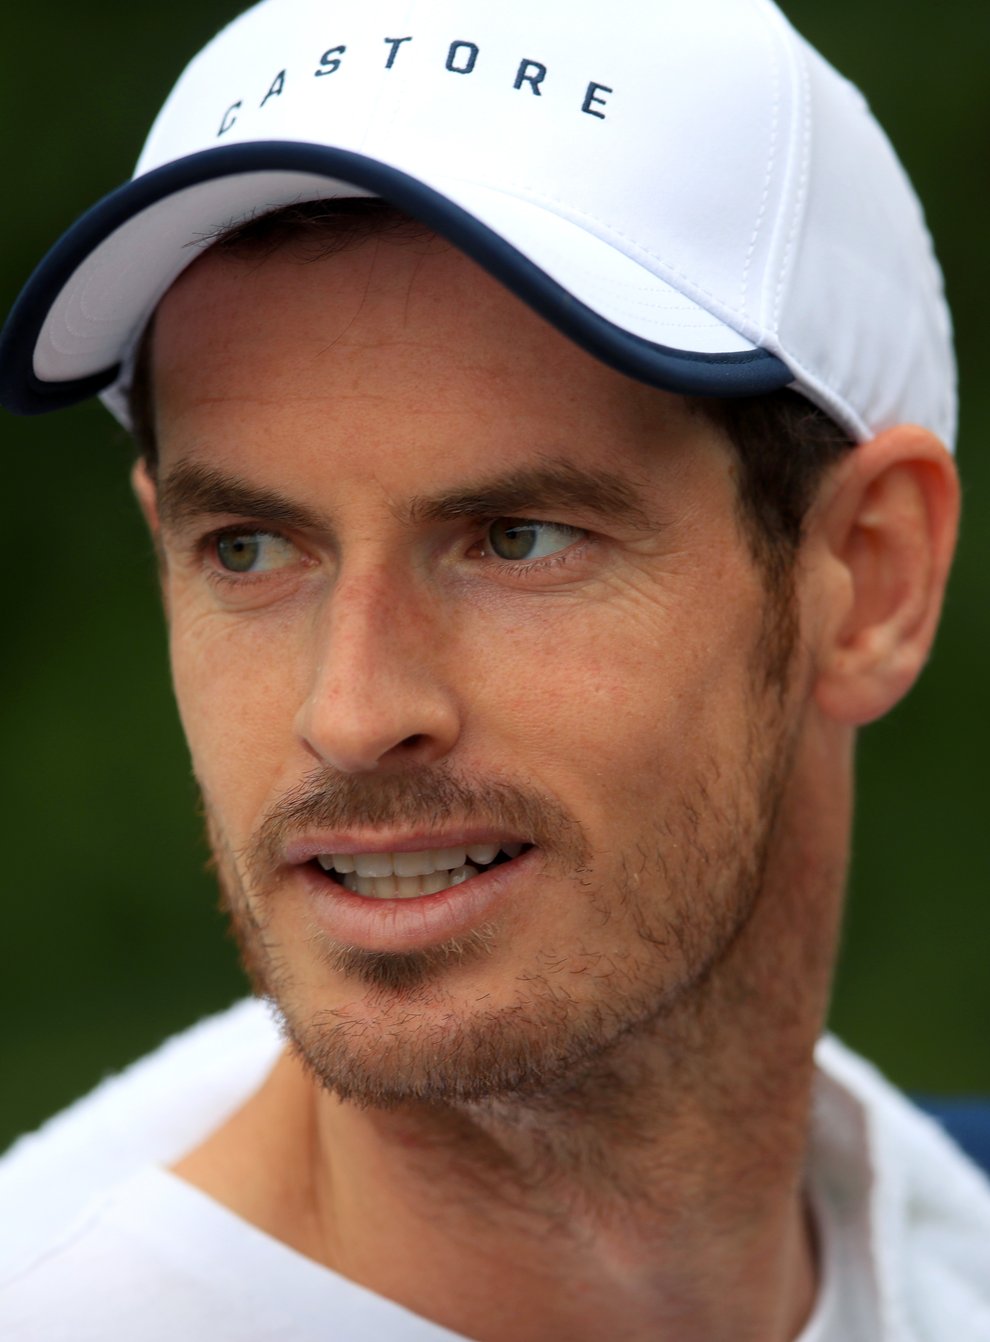 Andy Murray in action